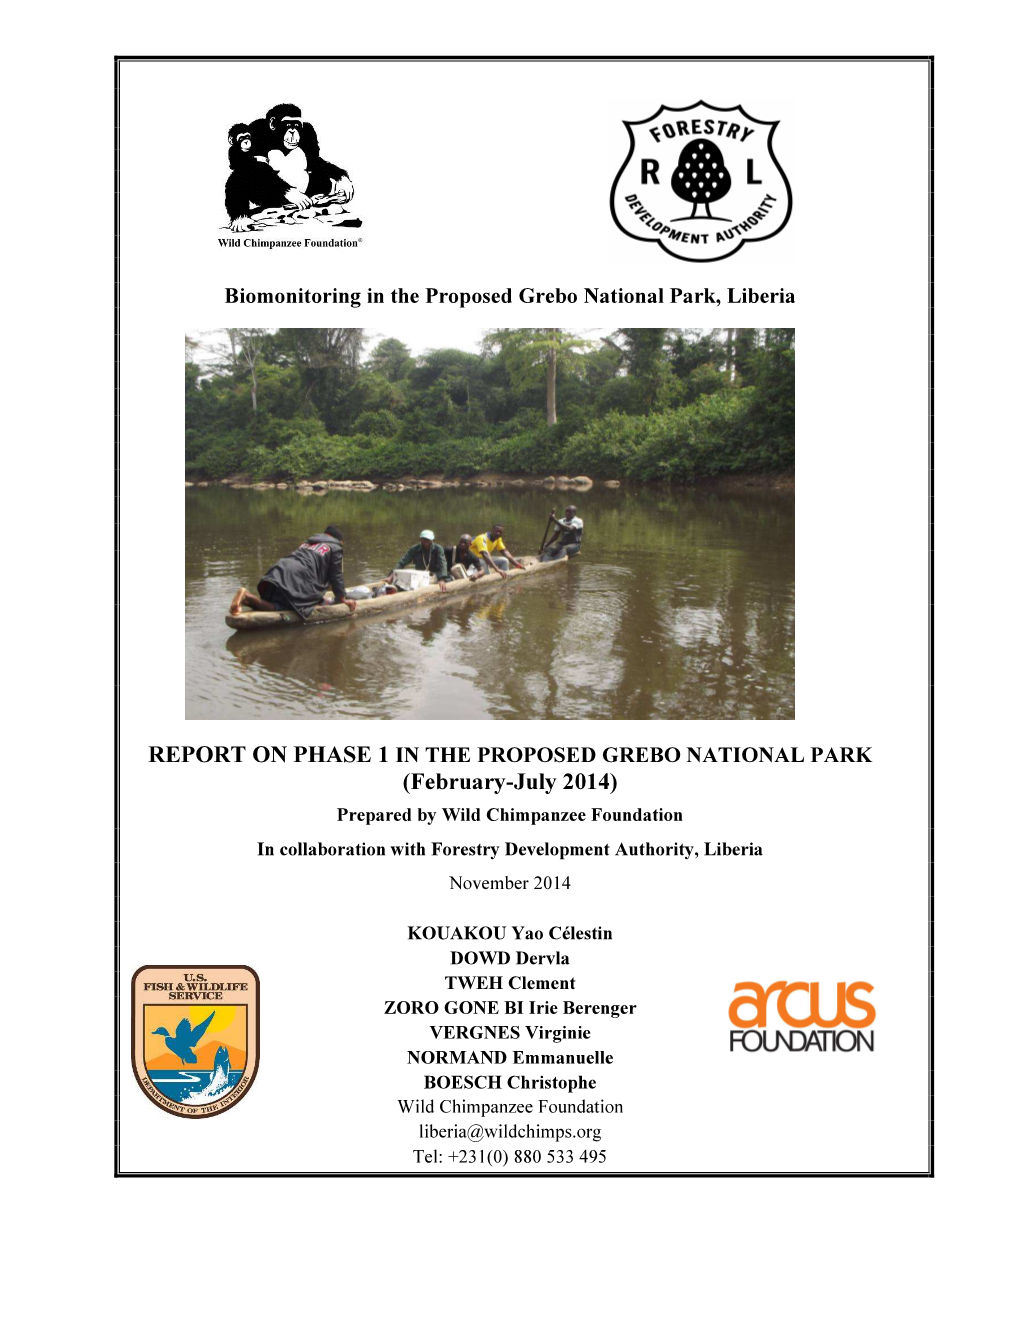 (February-July 2014) Prepared by Wild Chimpanzee Foundation in Collaboration with Forestry Development Authority, Liberia November 2014